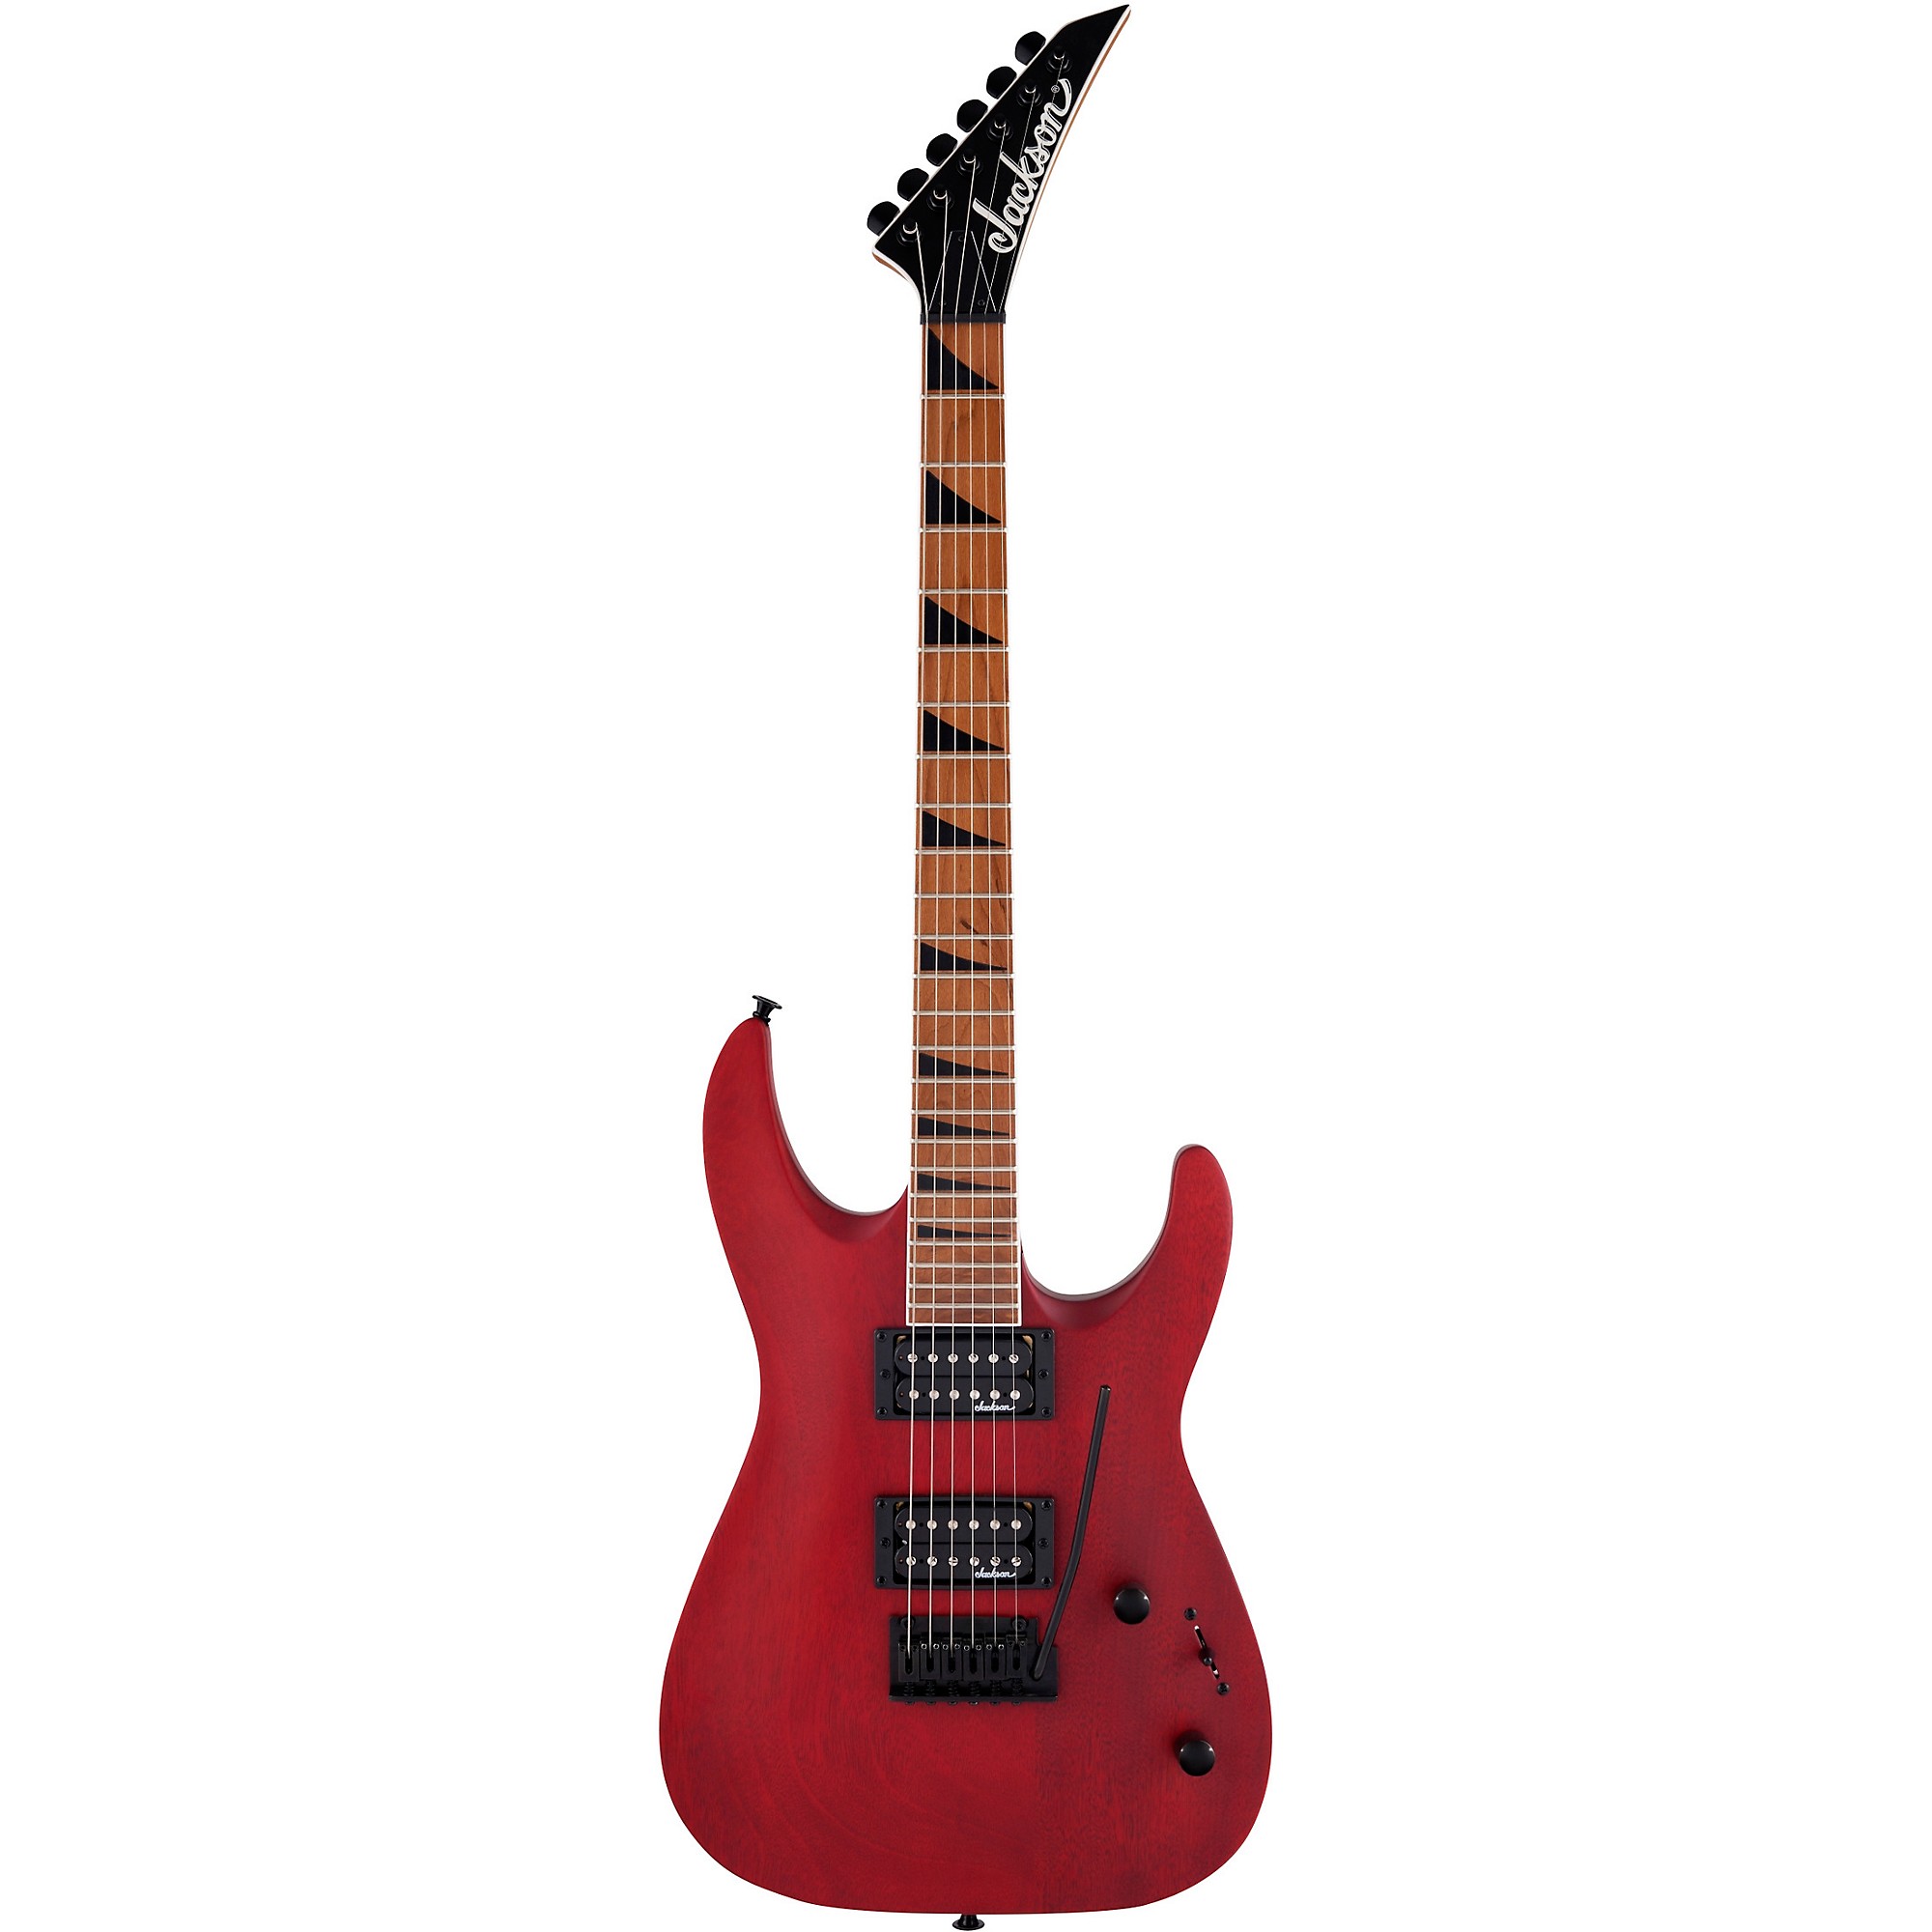 Электрогитара Jackson JS Series Dinky Arch Top JS24 DKAM Red Stain электрогитара jackson js series js24 dkam dinky archtop red stain